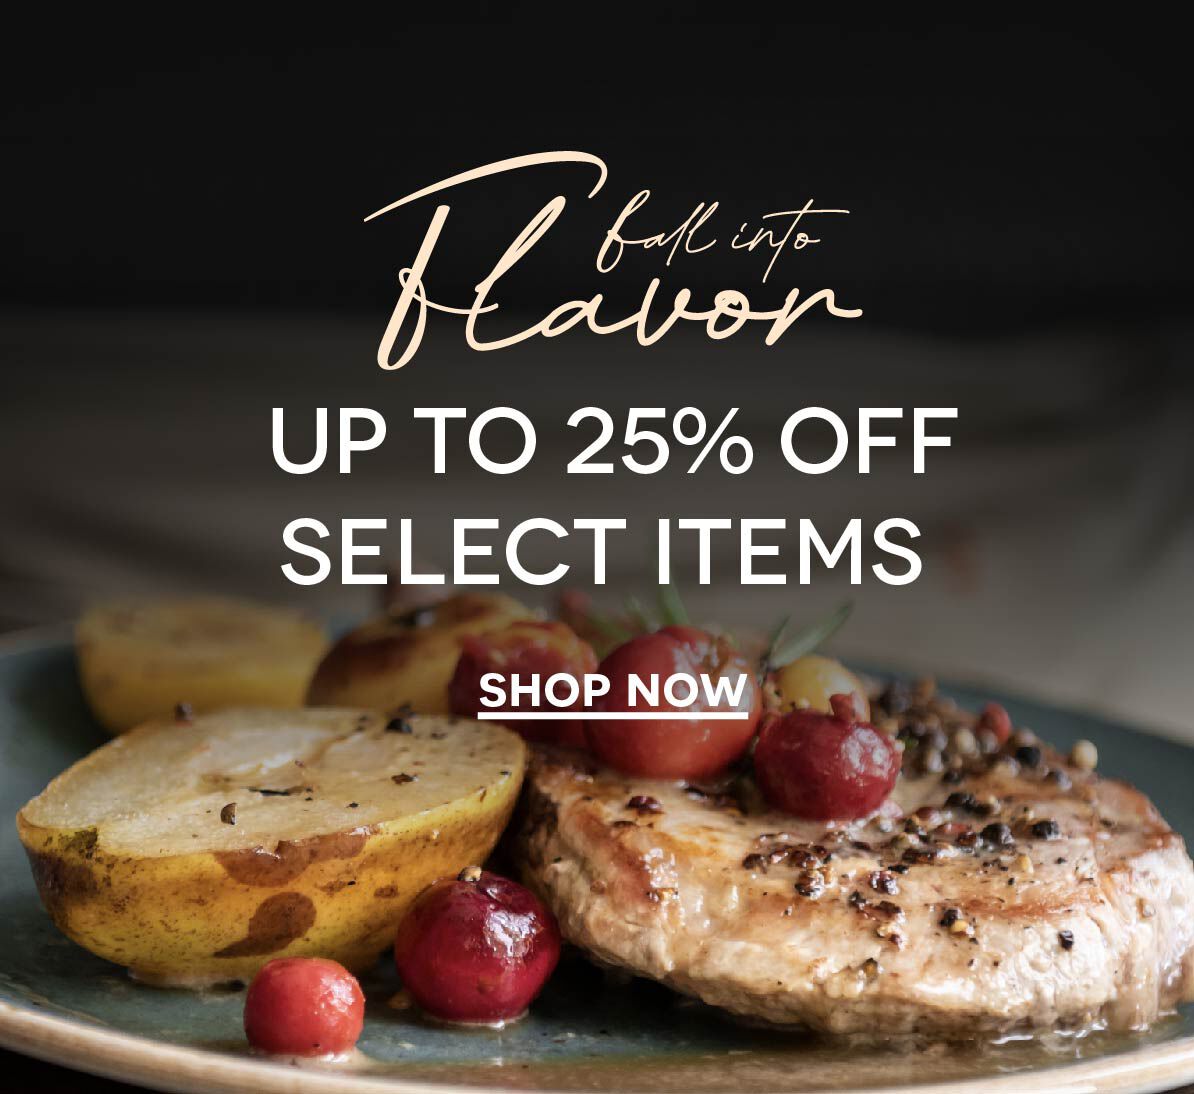 Up to 25% OFF Fall Favorites